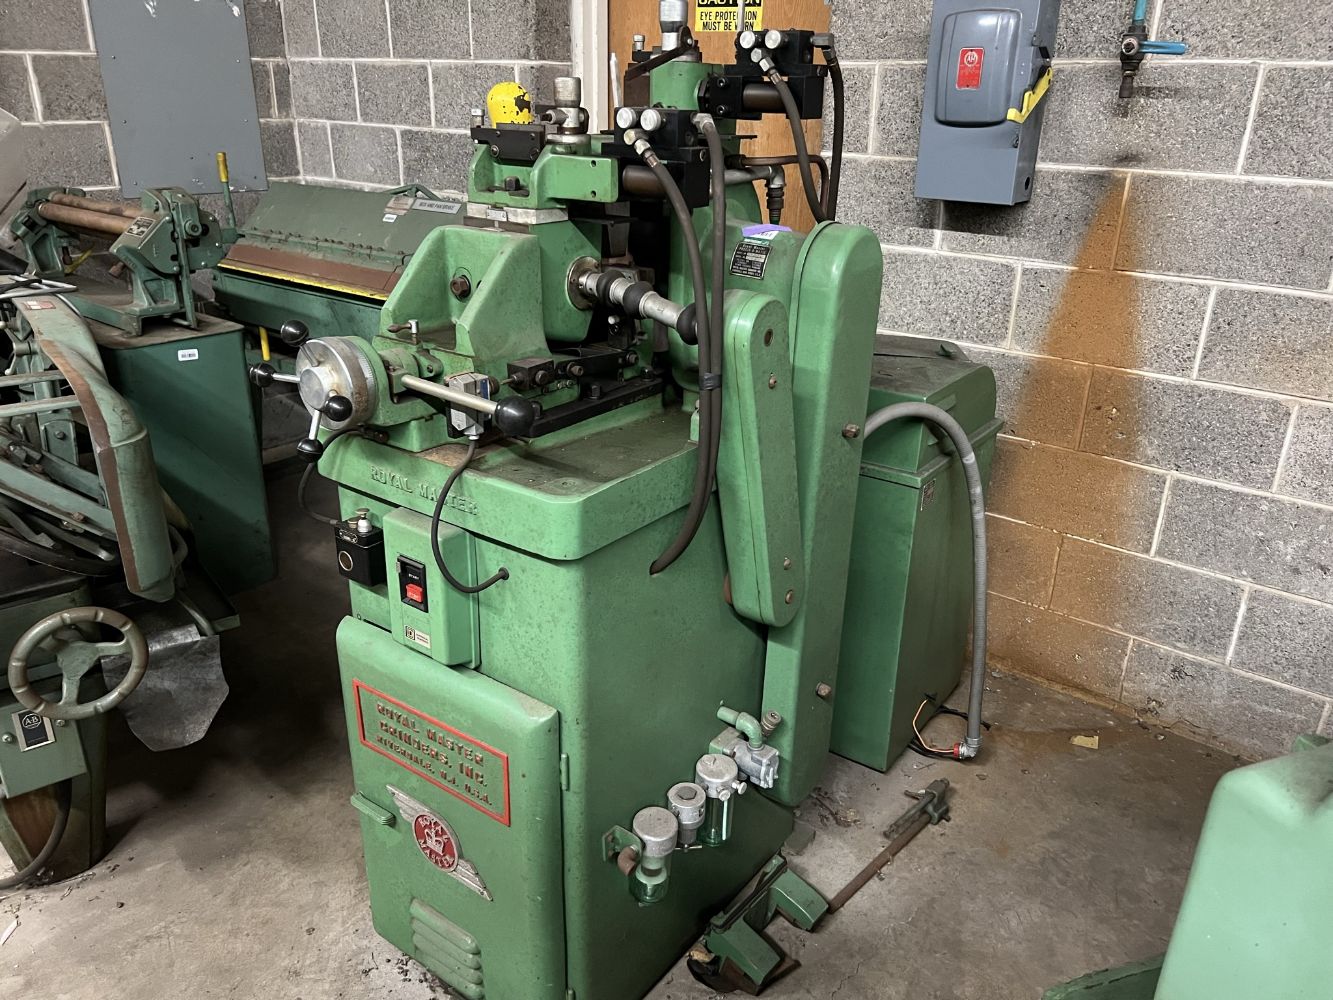 Surplus University Machine Shop Equipment – Moved for Convenience of Sale & Others